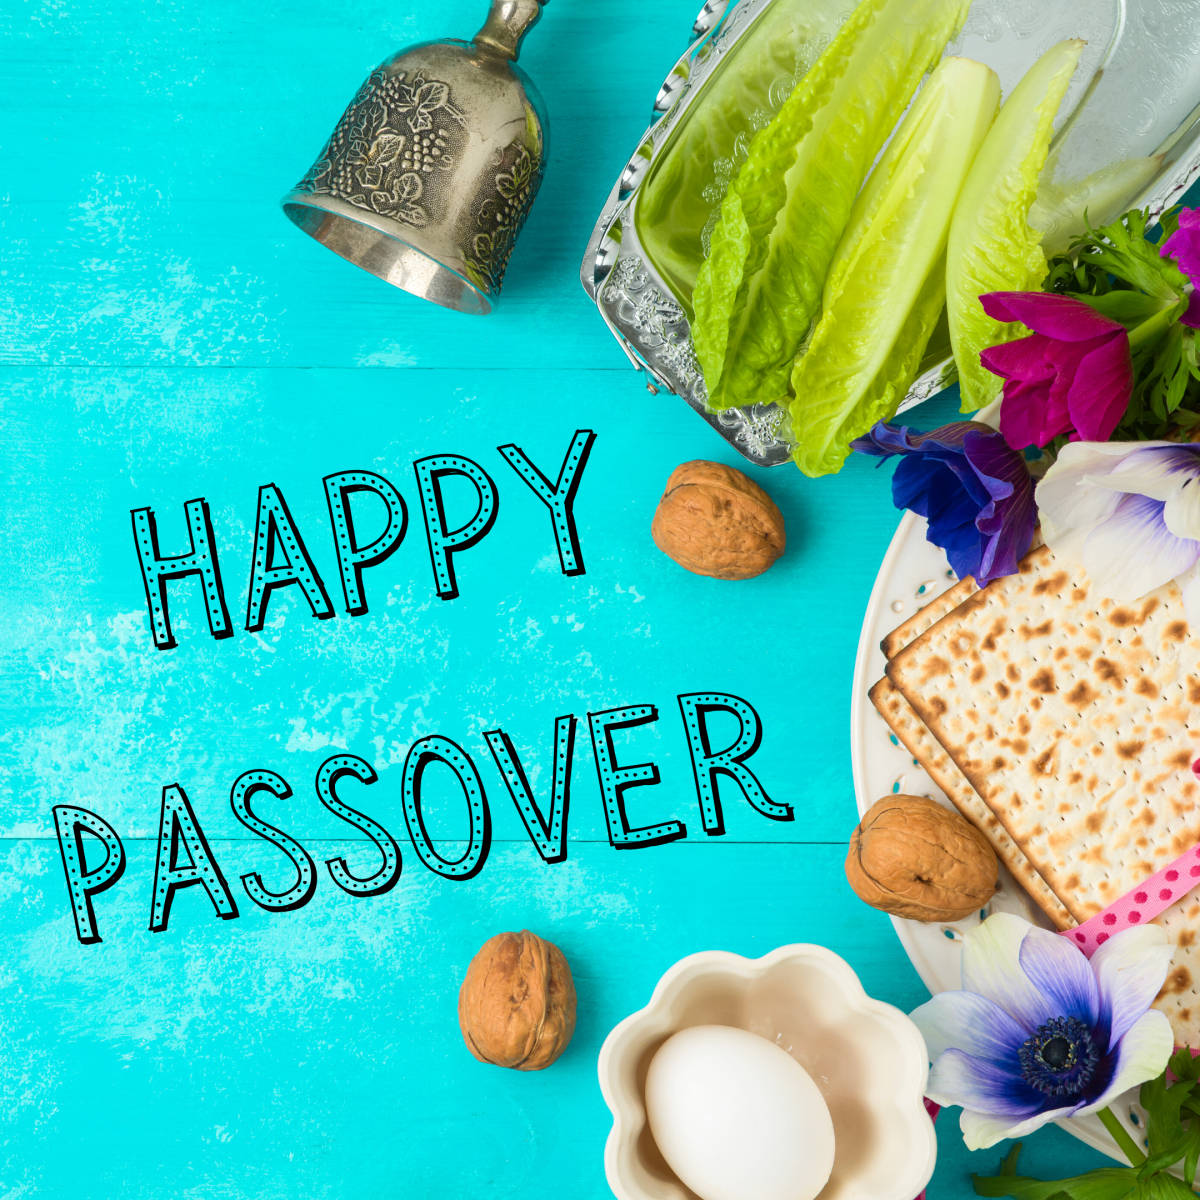 Blue Happy Passover Background